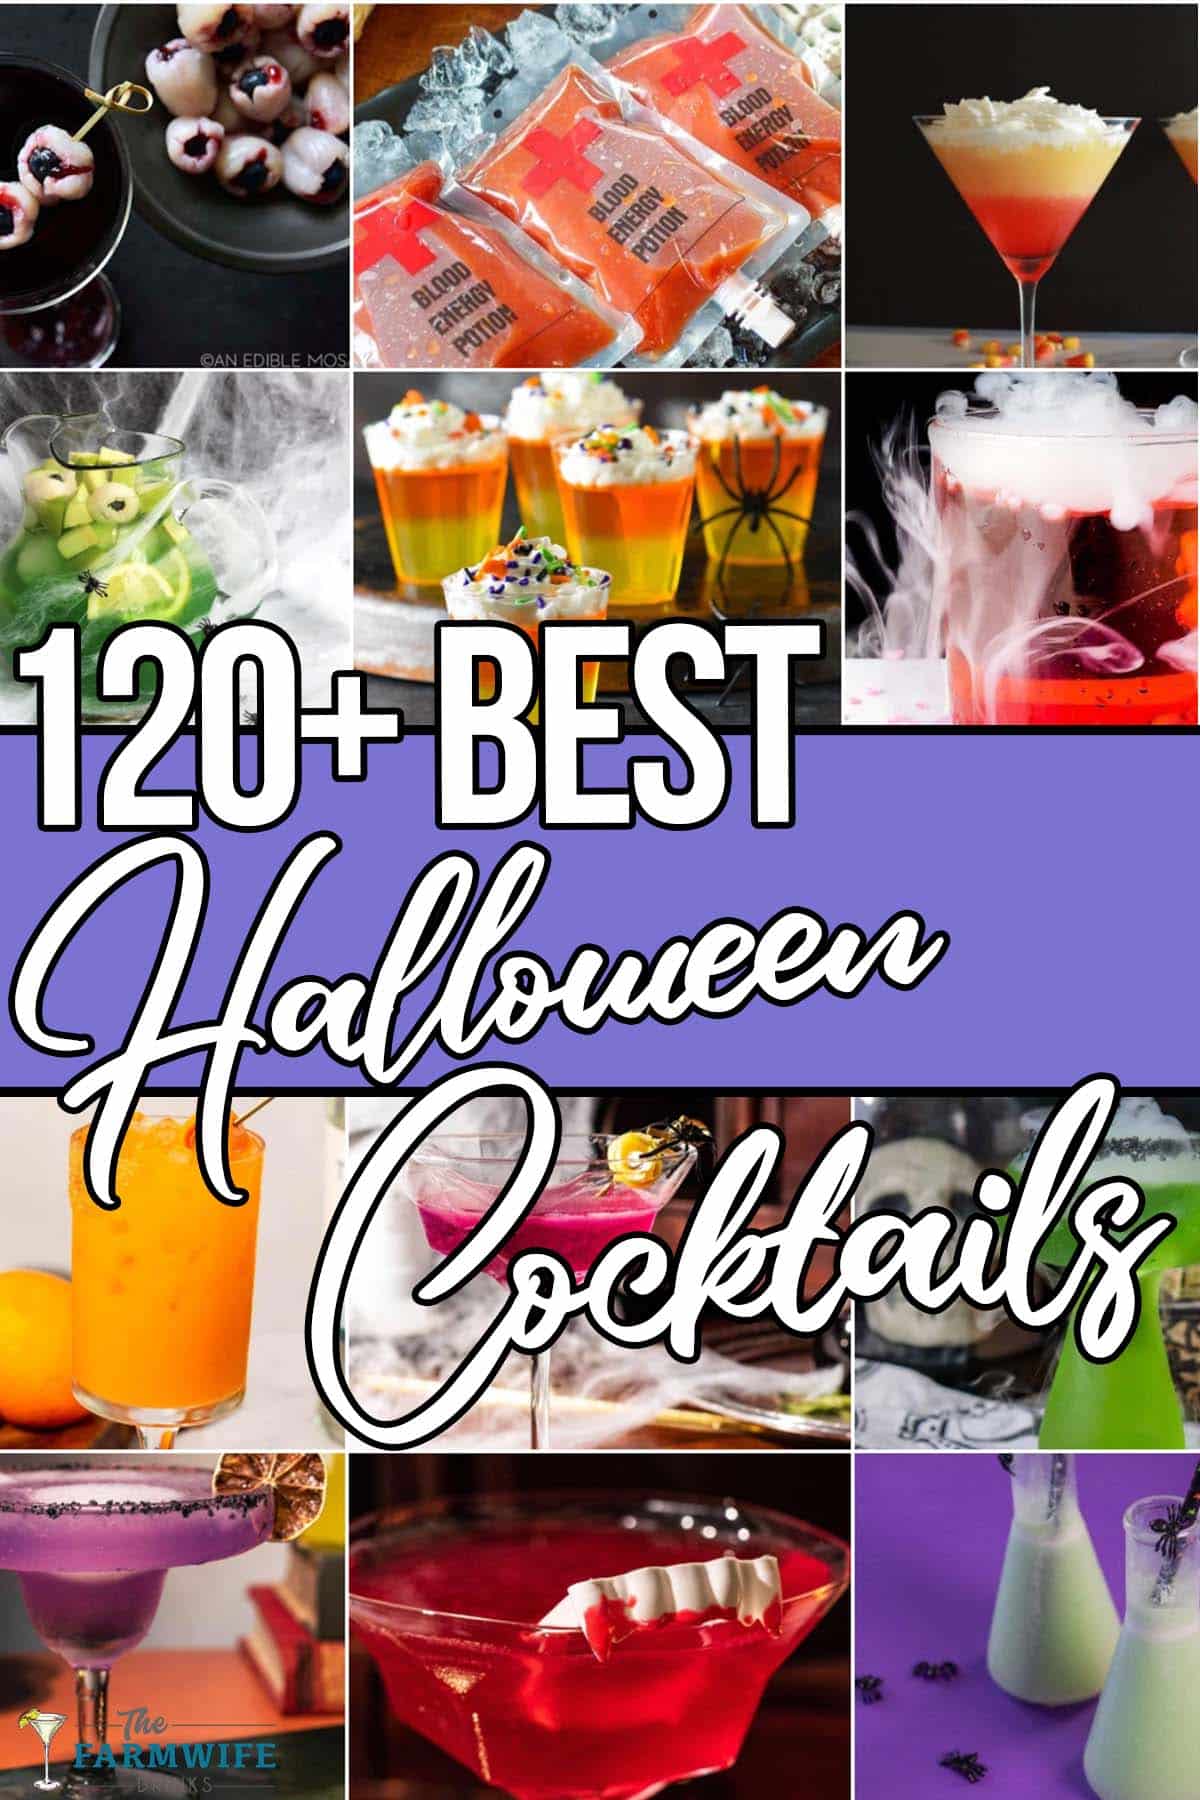 photo collage of halloween drinks with text which reads 120+ best halloween cocktails